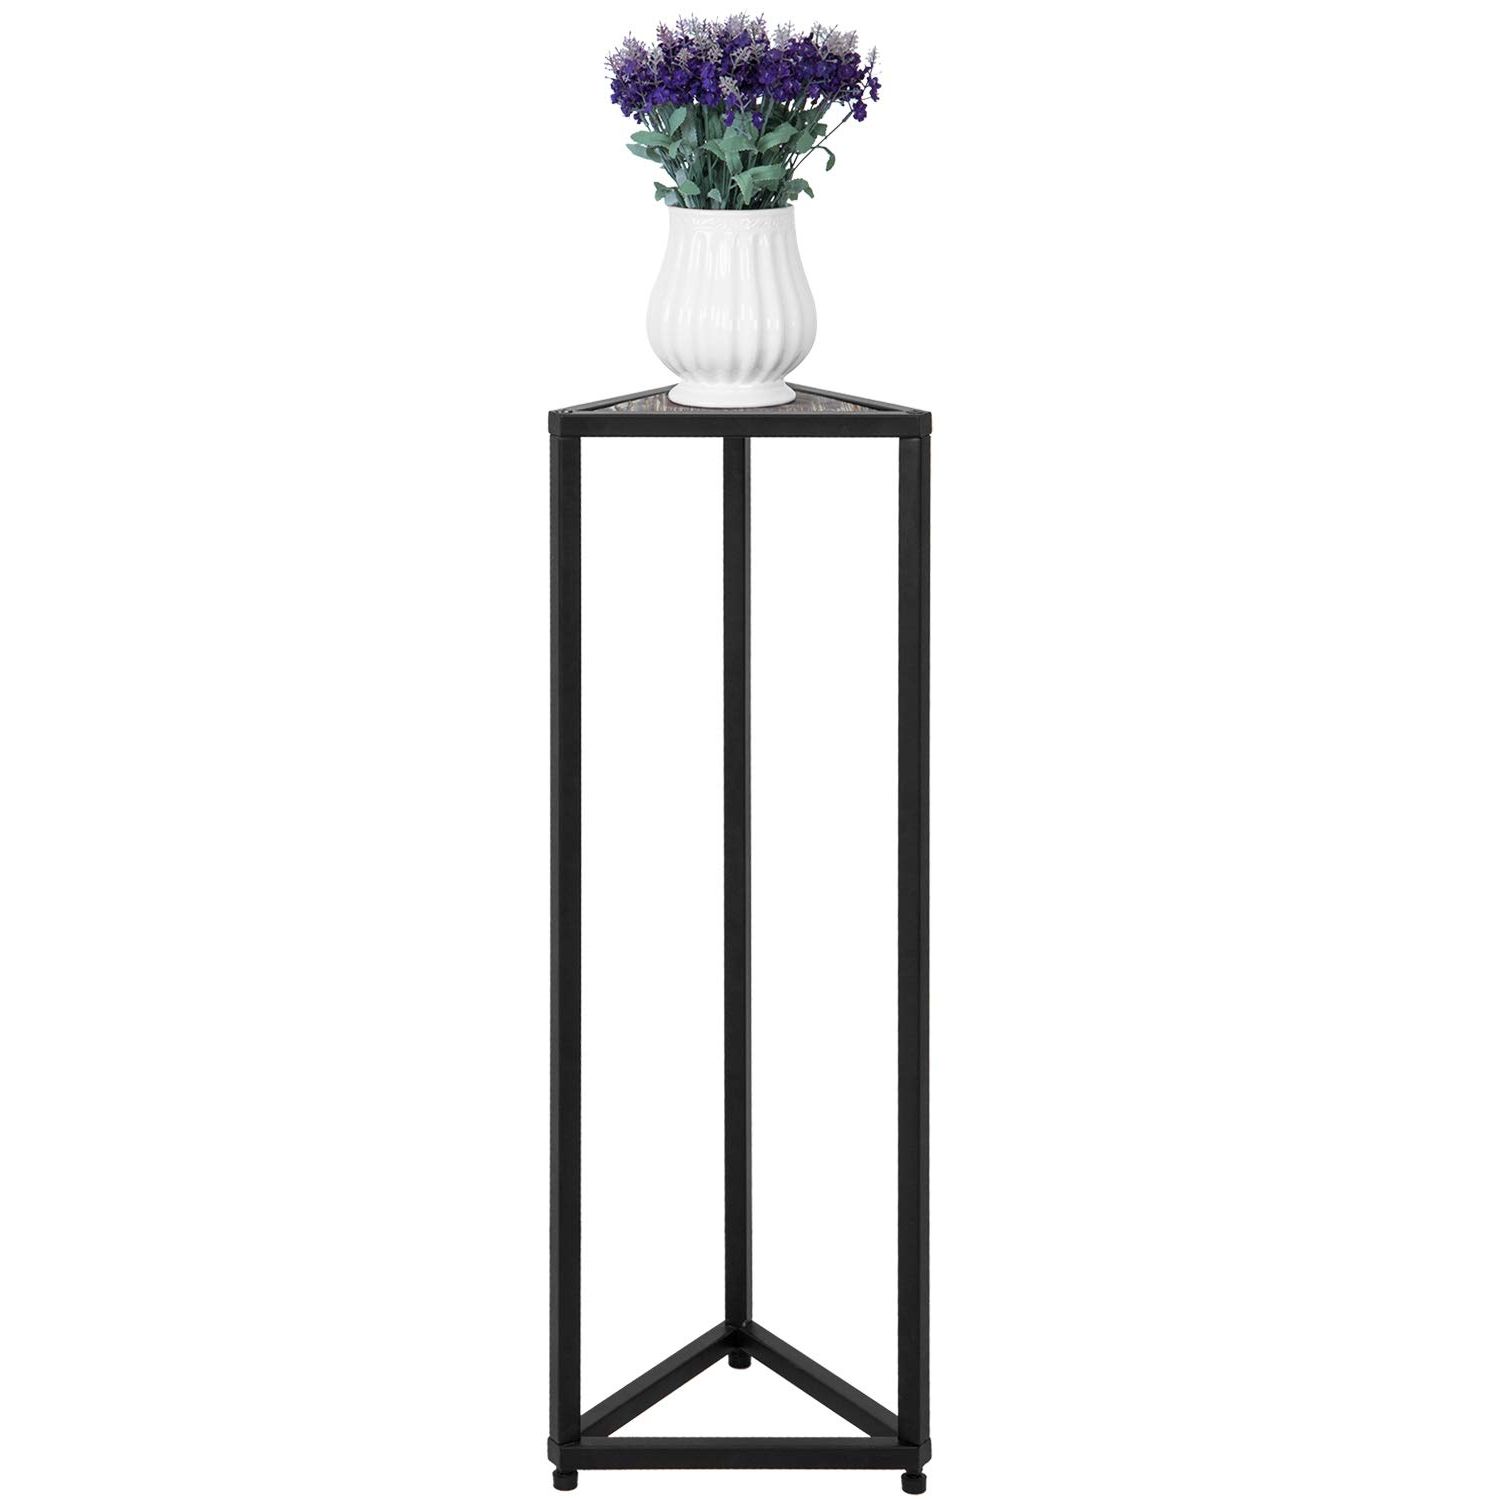 Mygift 36 Inch Triangular Plant Stand – Modern Torched Wood And Black Metal  Frame Flower Rack Potted Plant Pedestal Holder, Rustic Farmhouse Corner  Accent Table In Widely Used 36 Inch Plant Stands (View 2 of 15)